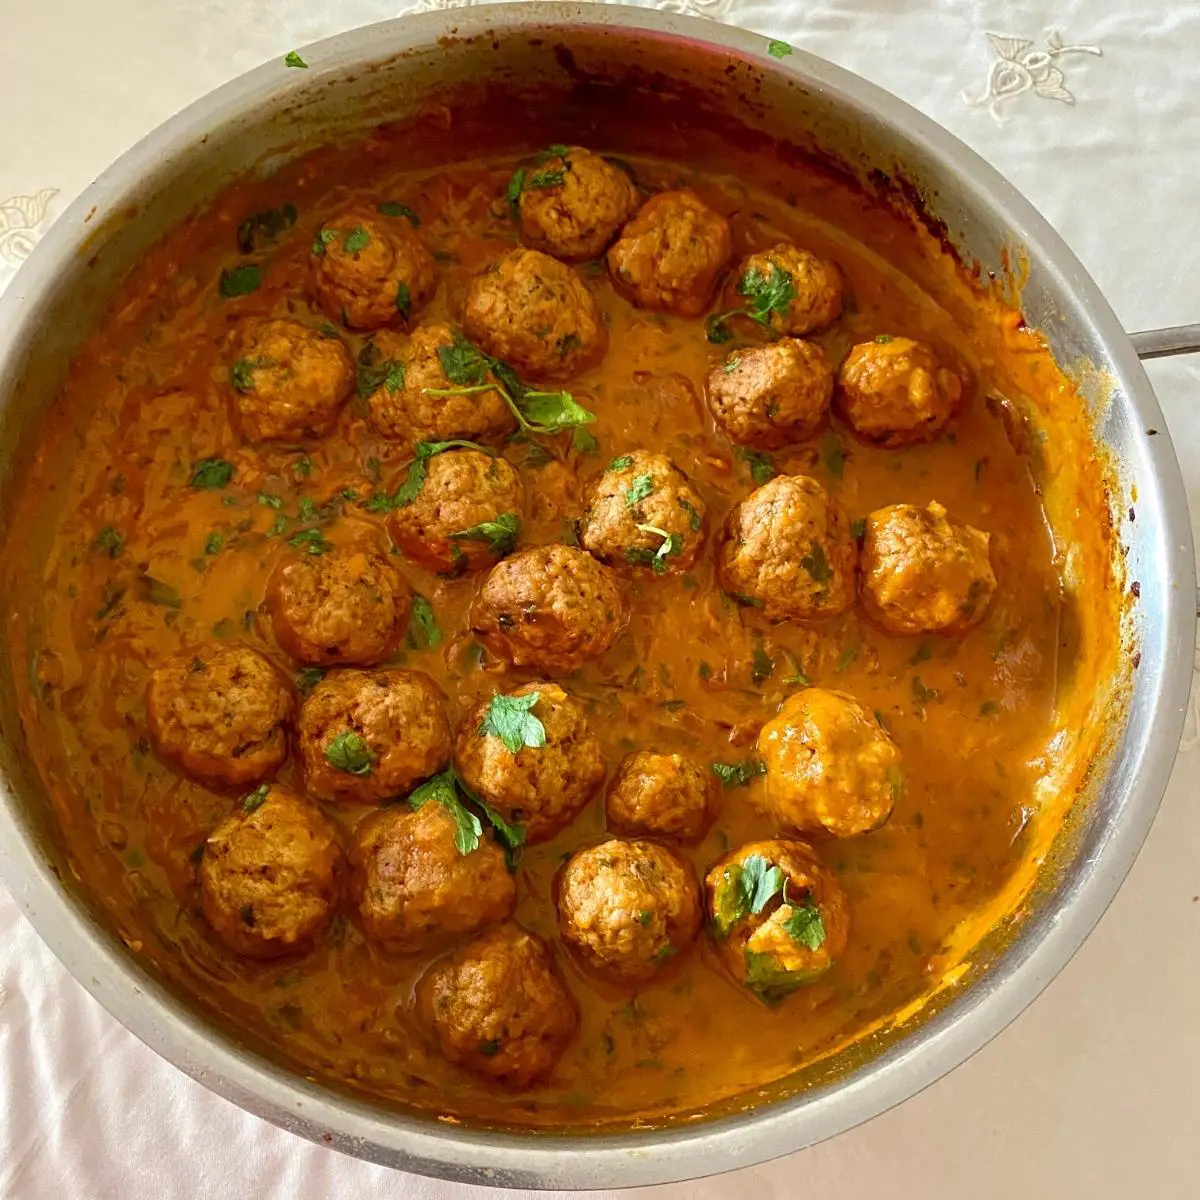 A skillet with curry and meatballs.